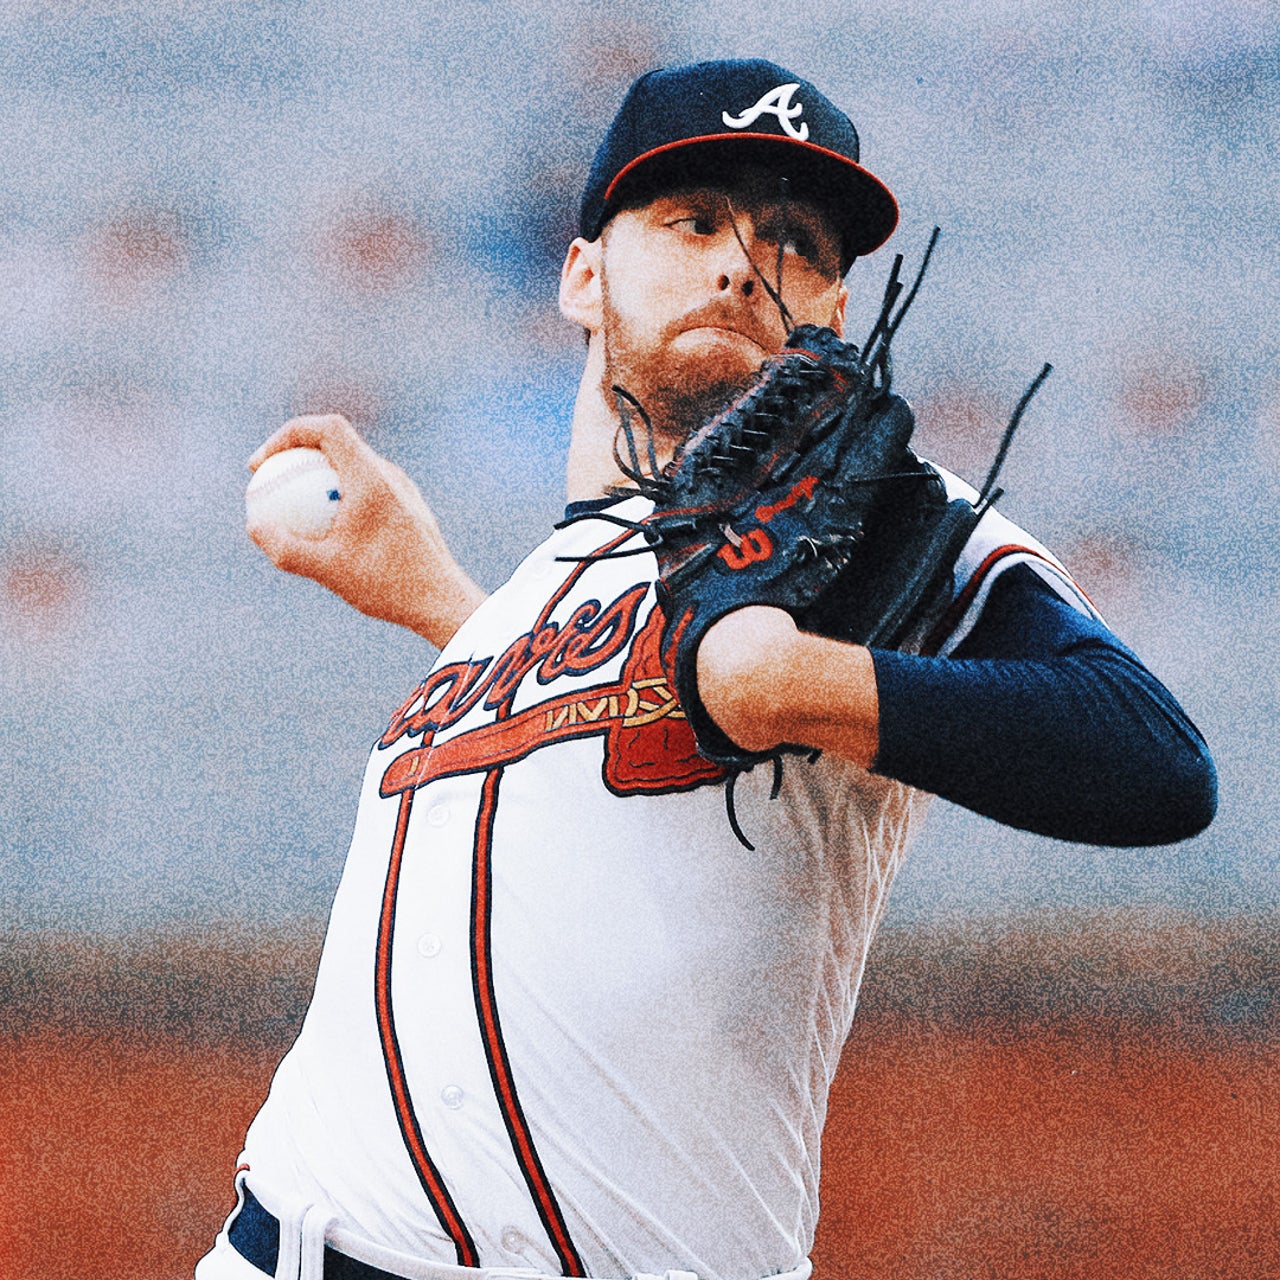 Atlanta Braves - Ian Anderson is the third pitcher in